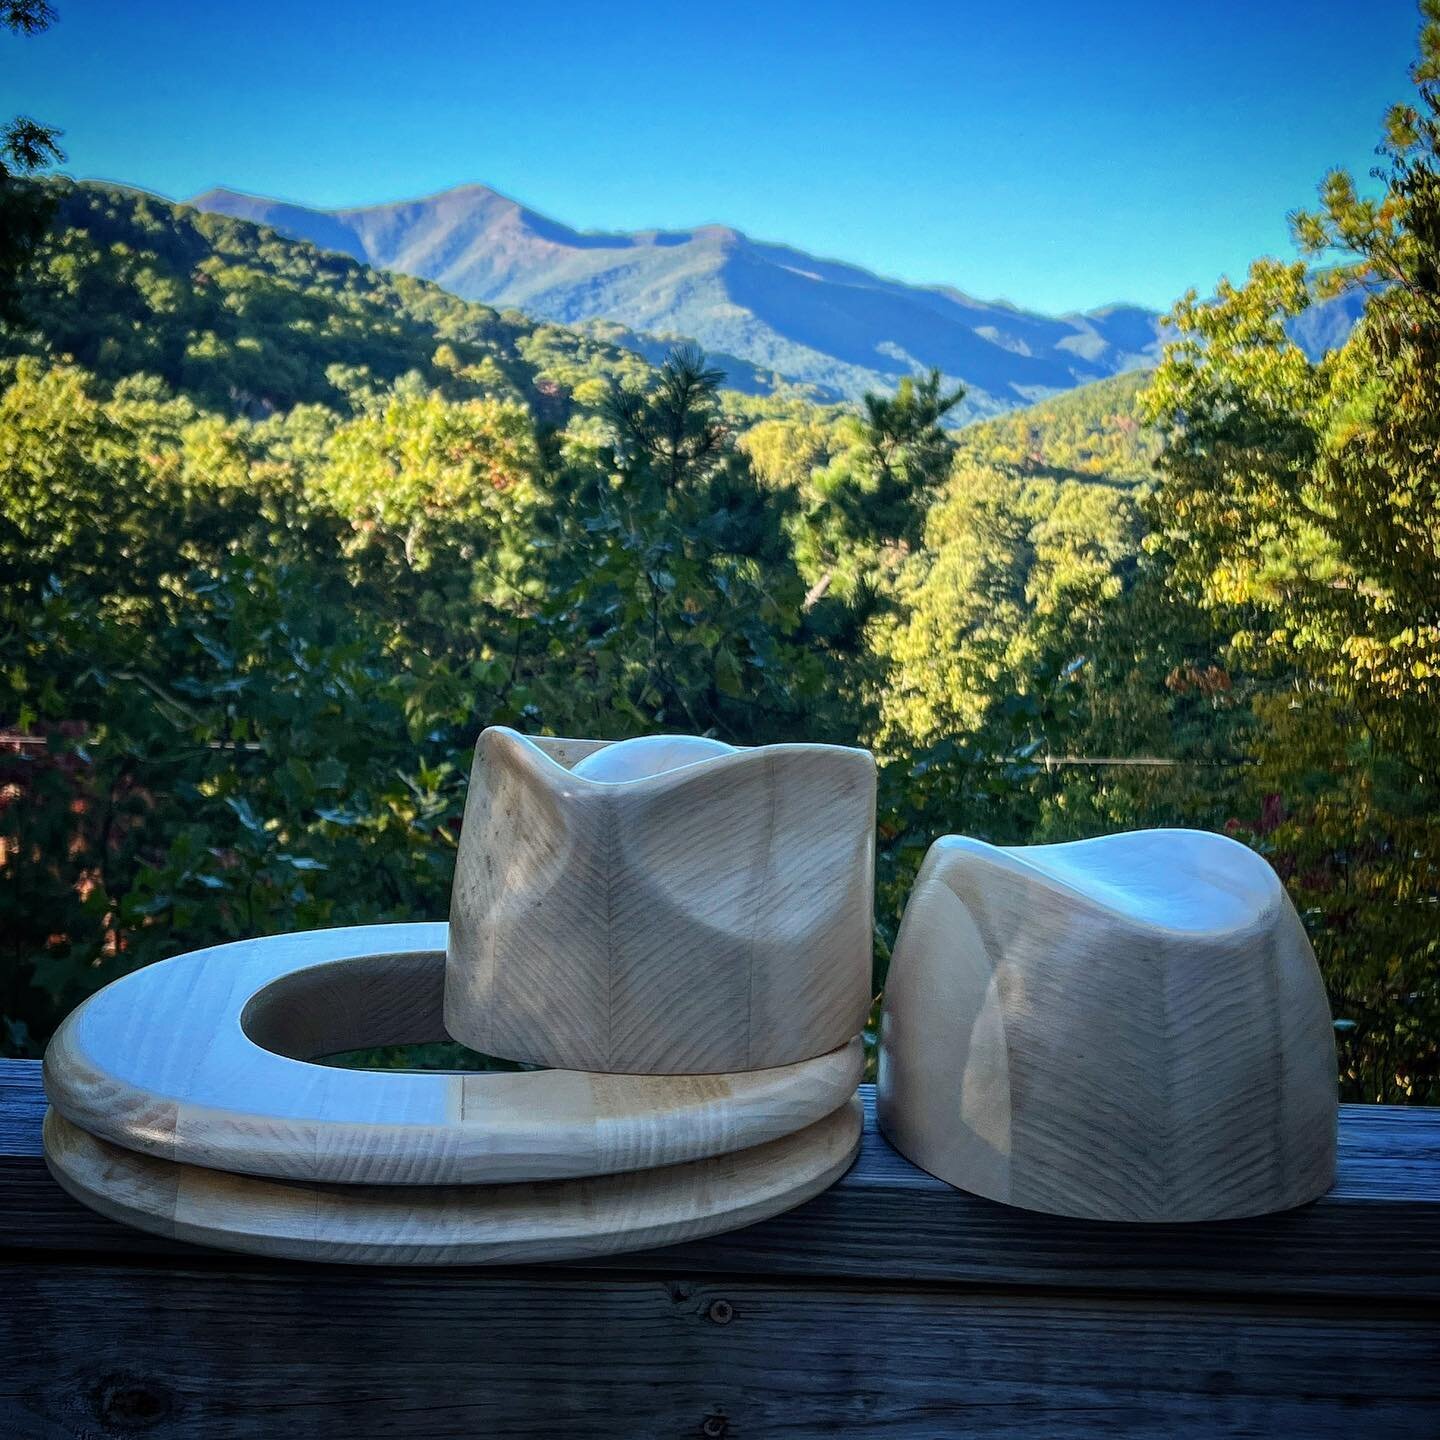 New custom blocks just arrived from my block maker for Mike Ramsey&rsquo;s custom hats!  4 hats to do before I can work on these beauties #hatmaker #customhat  #unisexstyle  #fedora  #boho #asheville #northcarolina #unisex #blackmountain #fashion #be